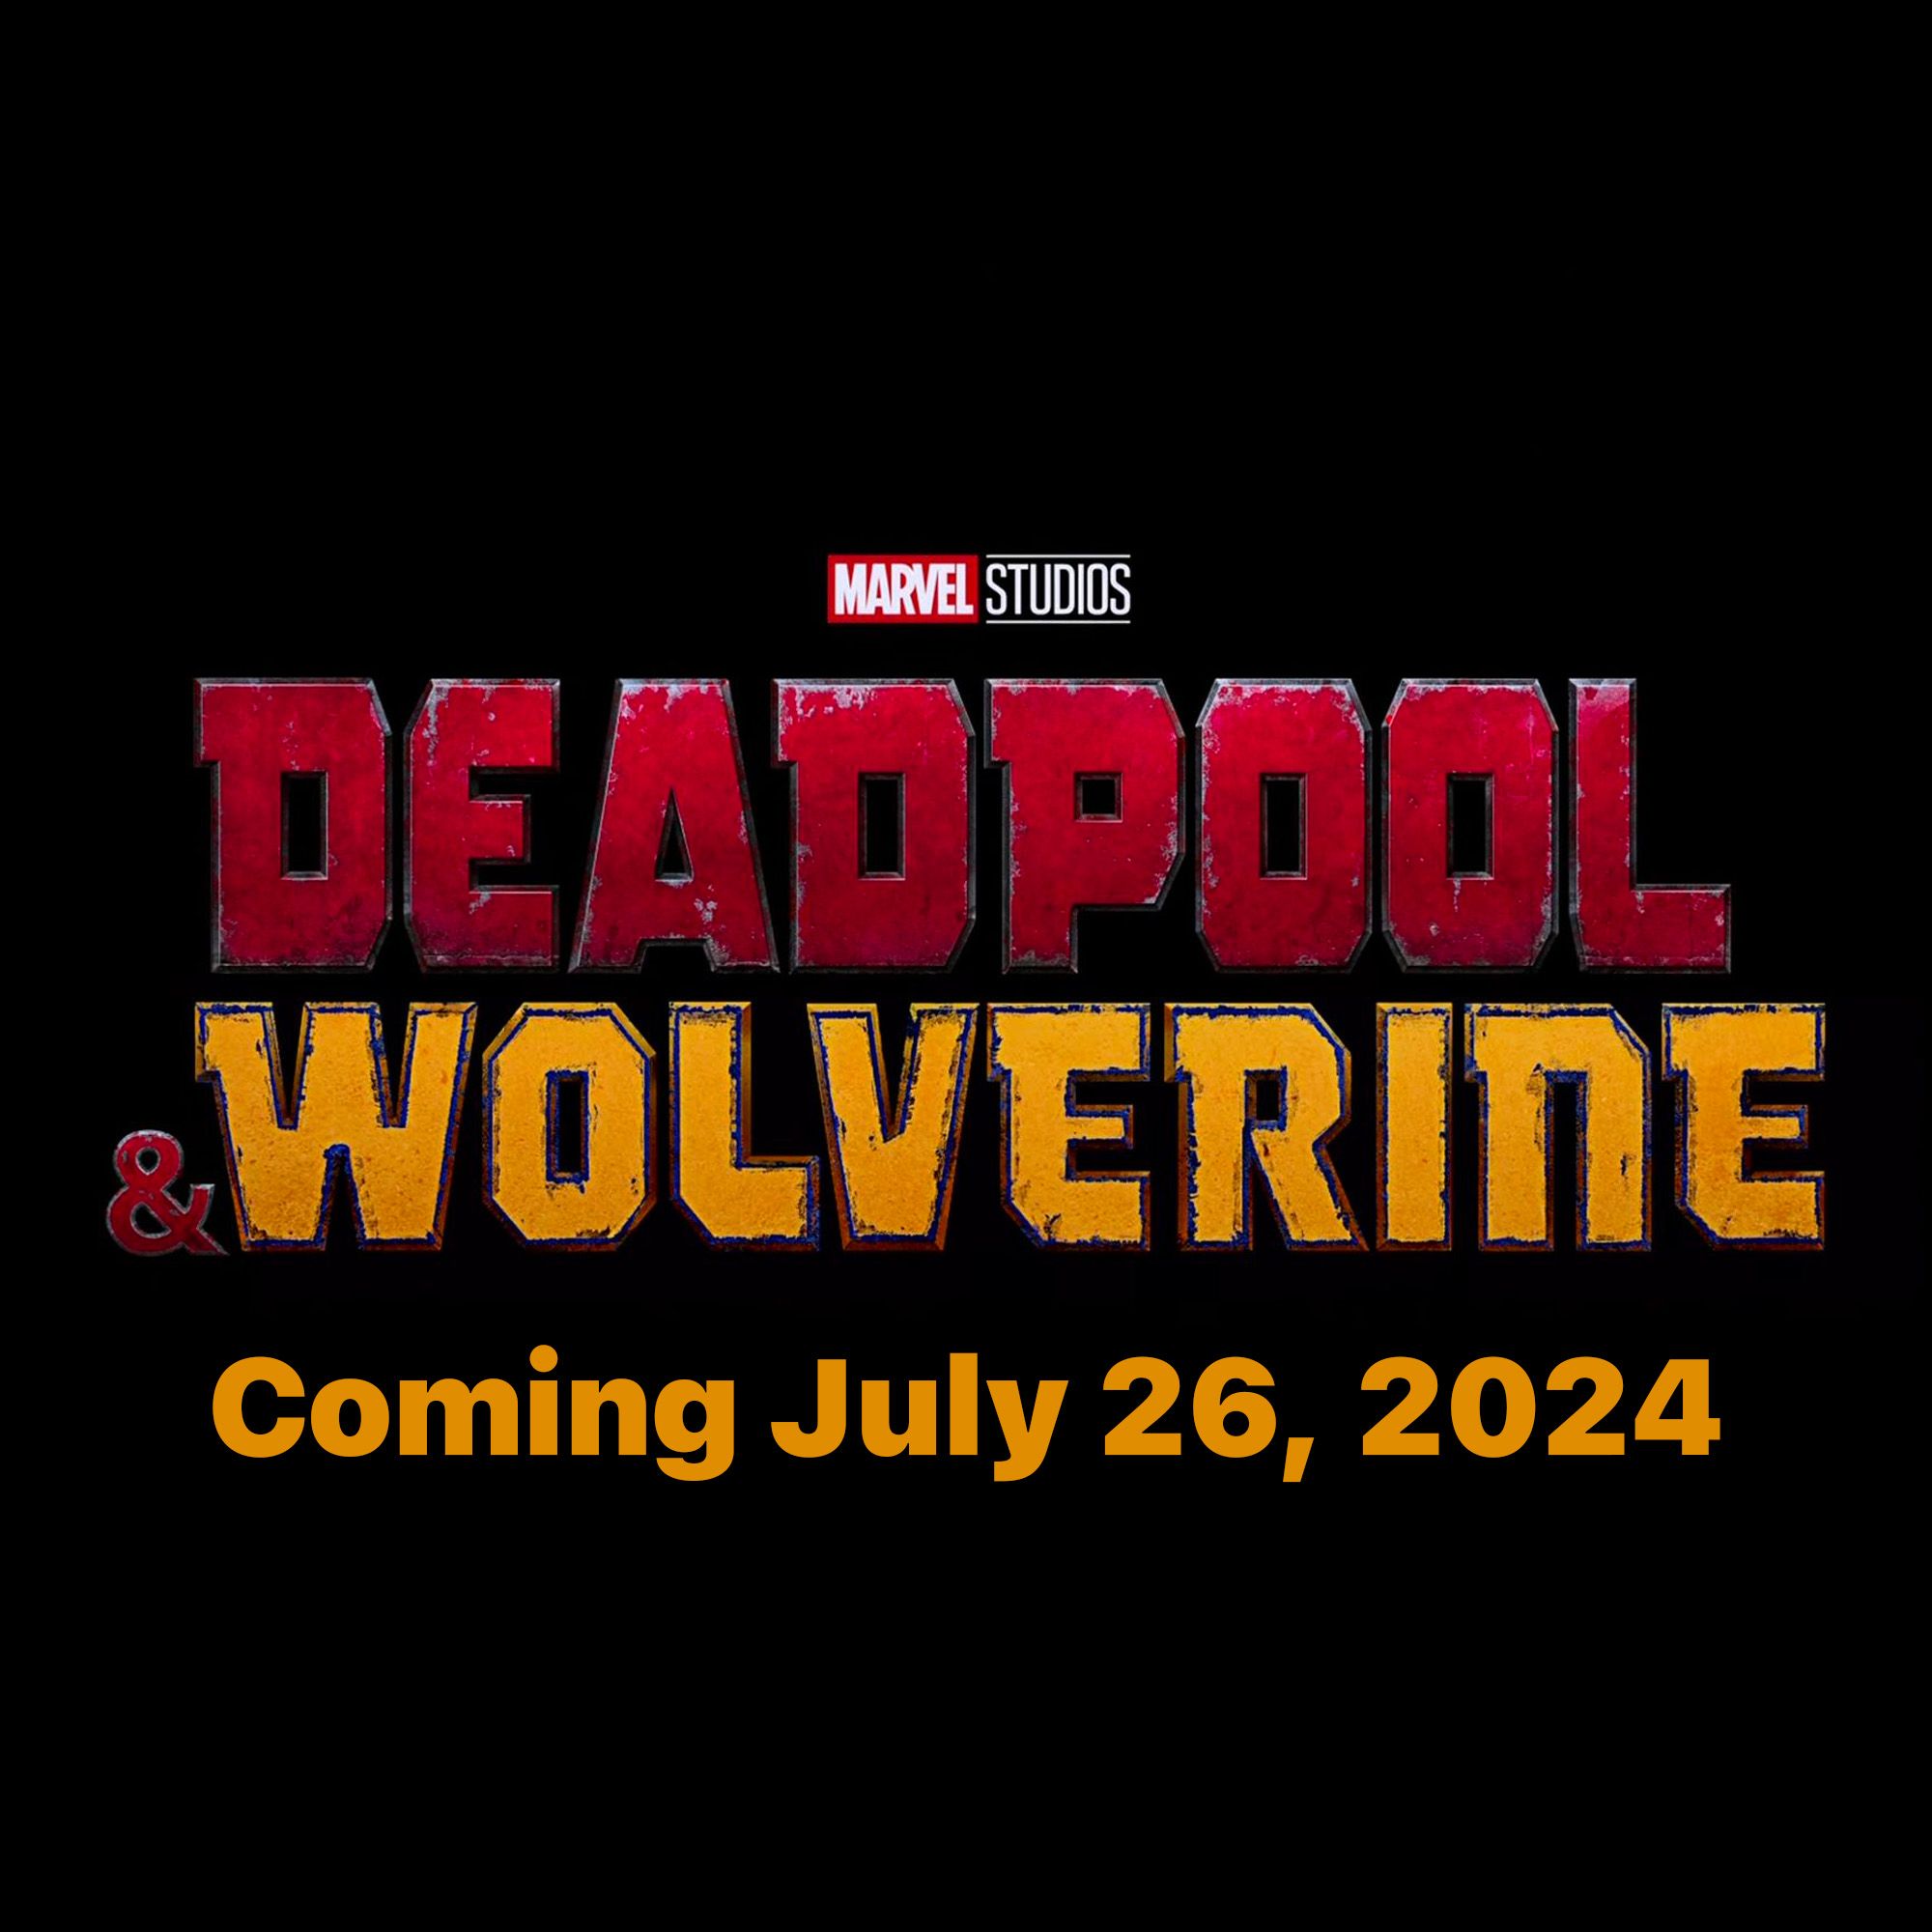 Deadpool & Wolverine coming July 26th 2024